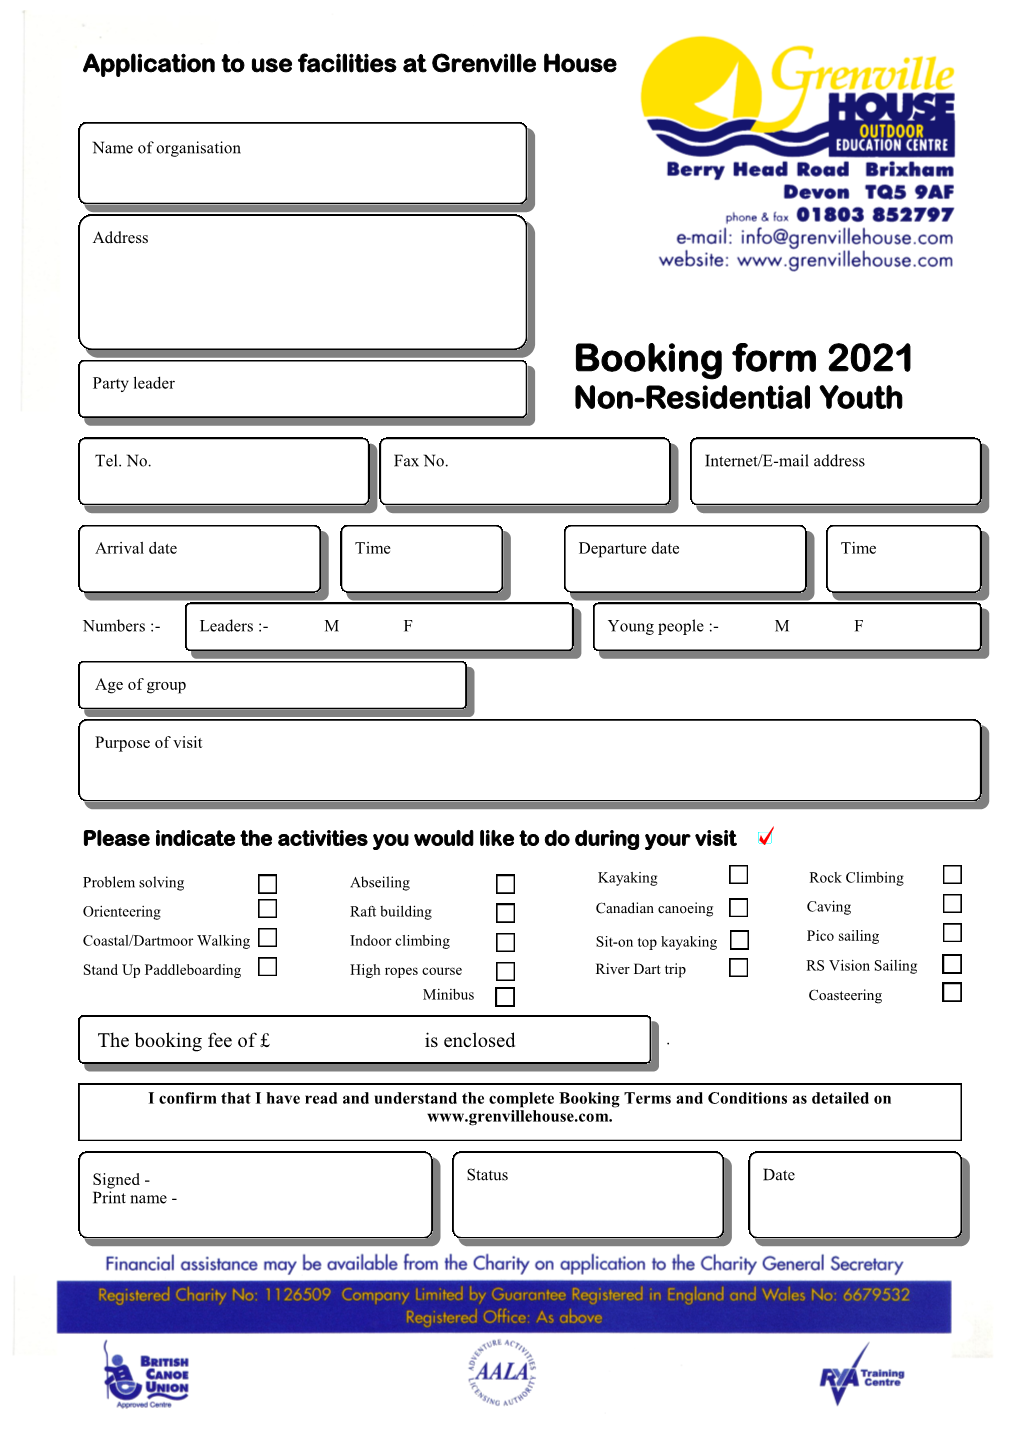 Booking Form 2021 Party Leader Non-Residential Youth